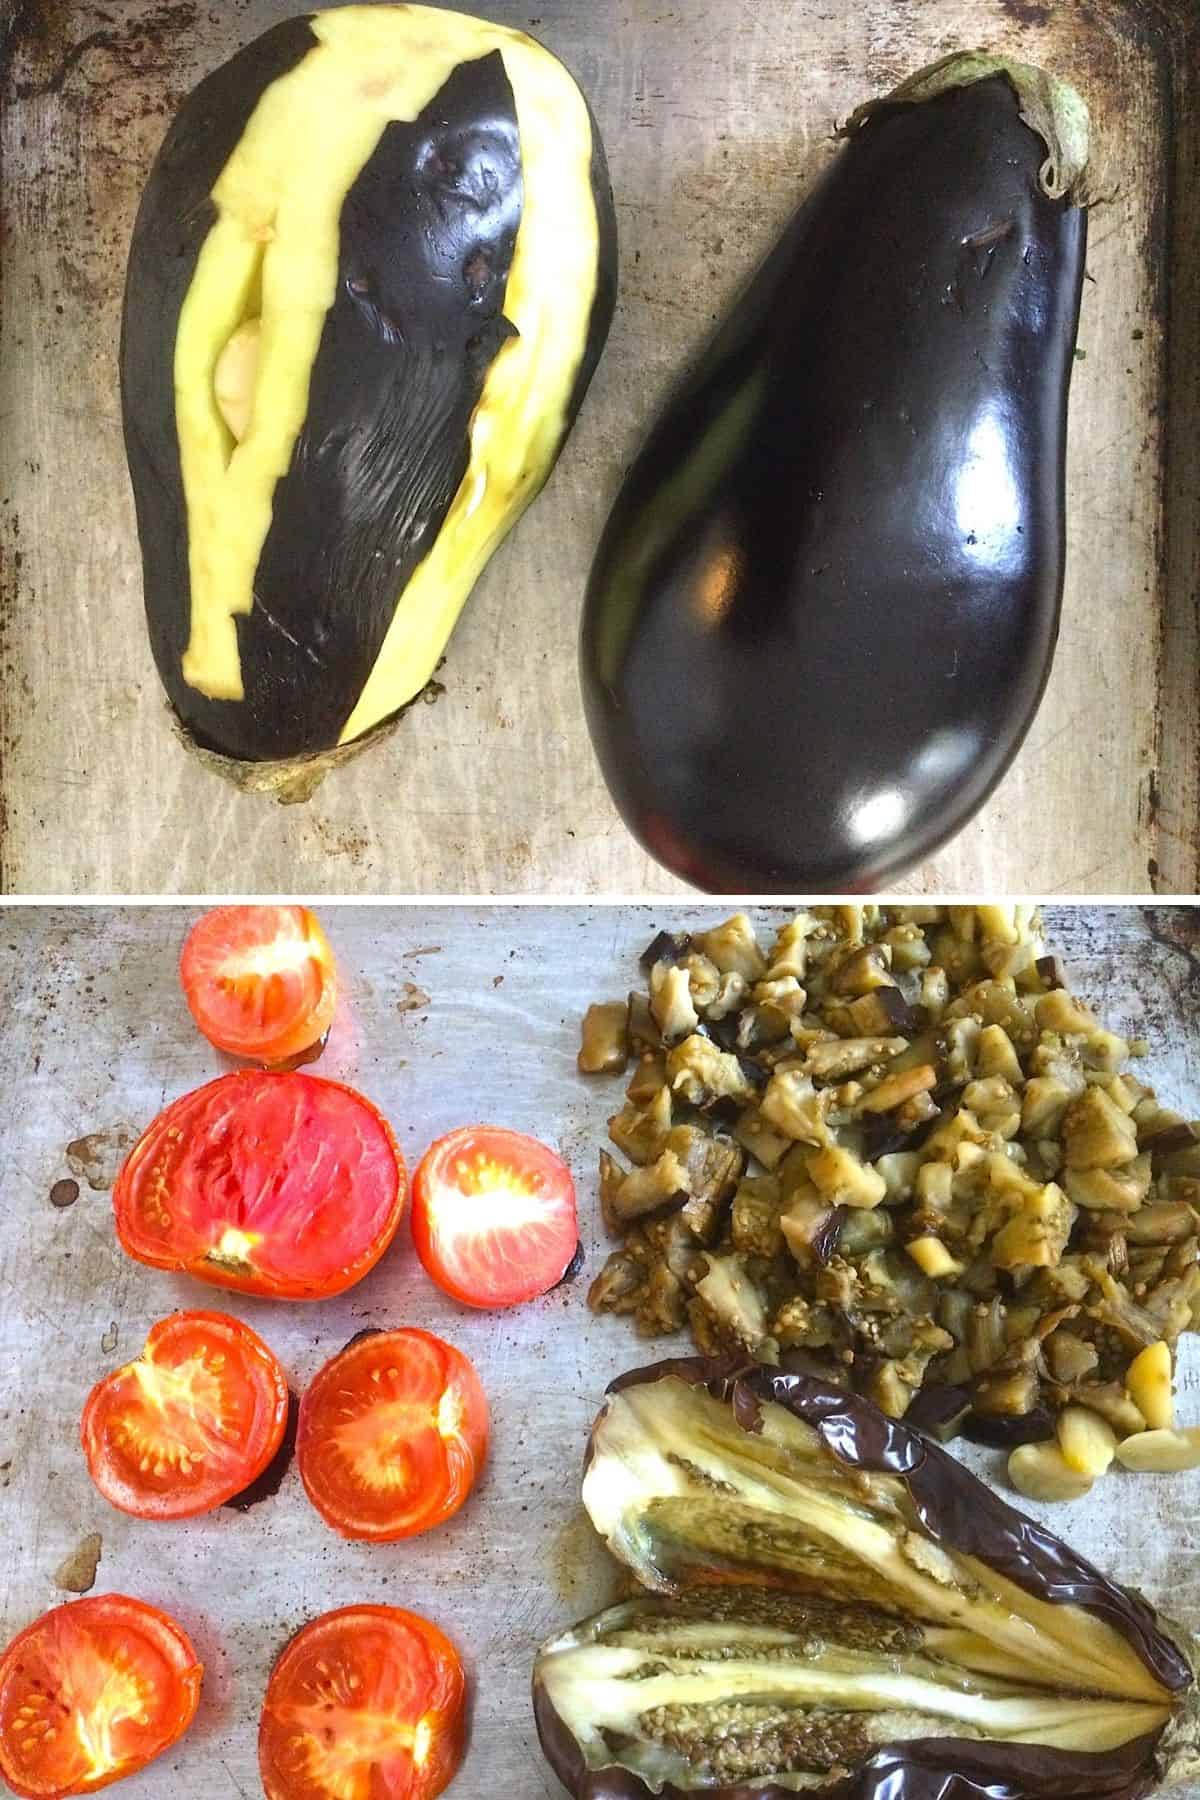 Roasted eggplants and tomatoes on a baking sheet.